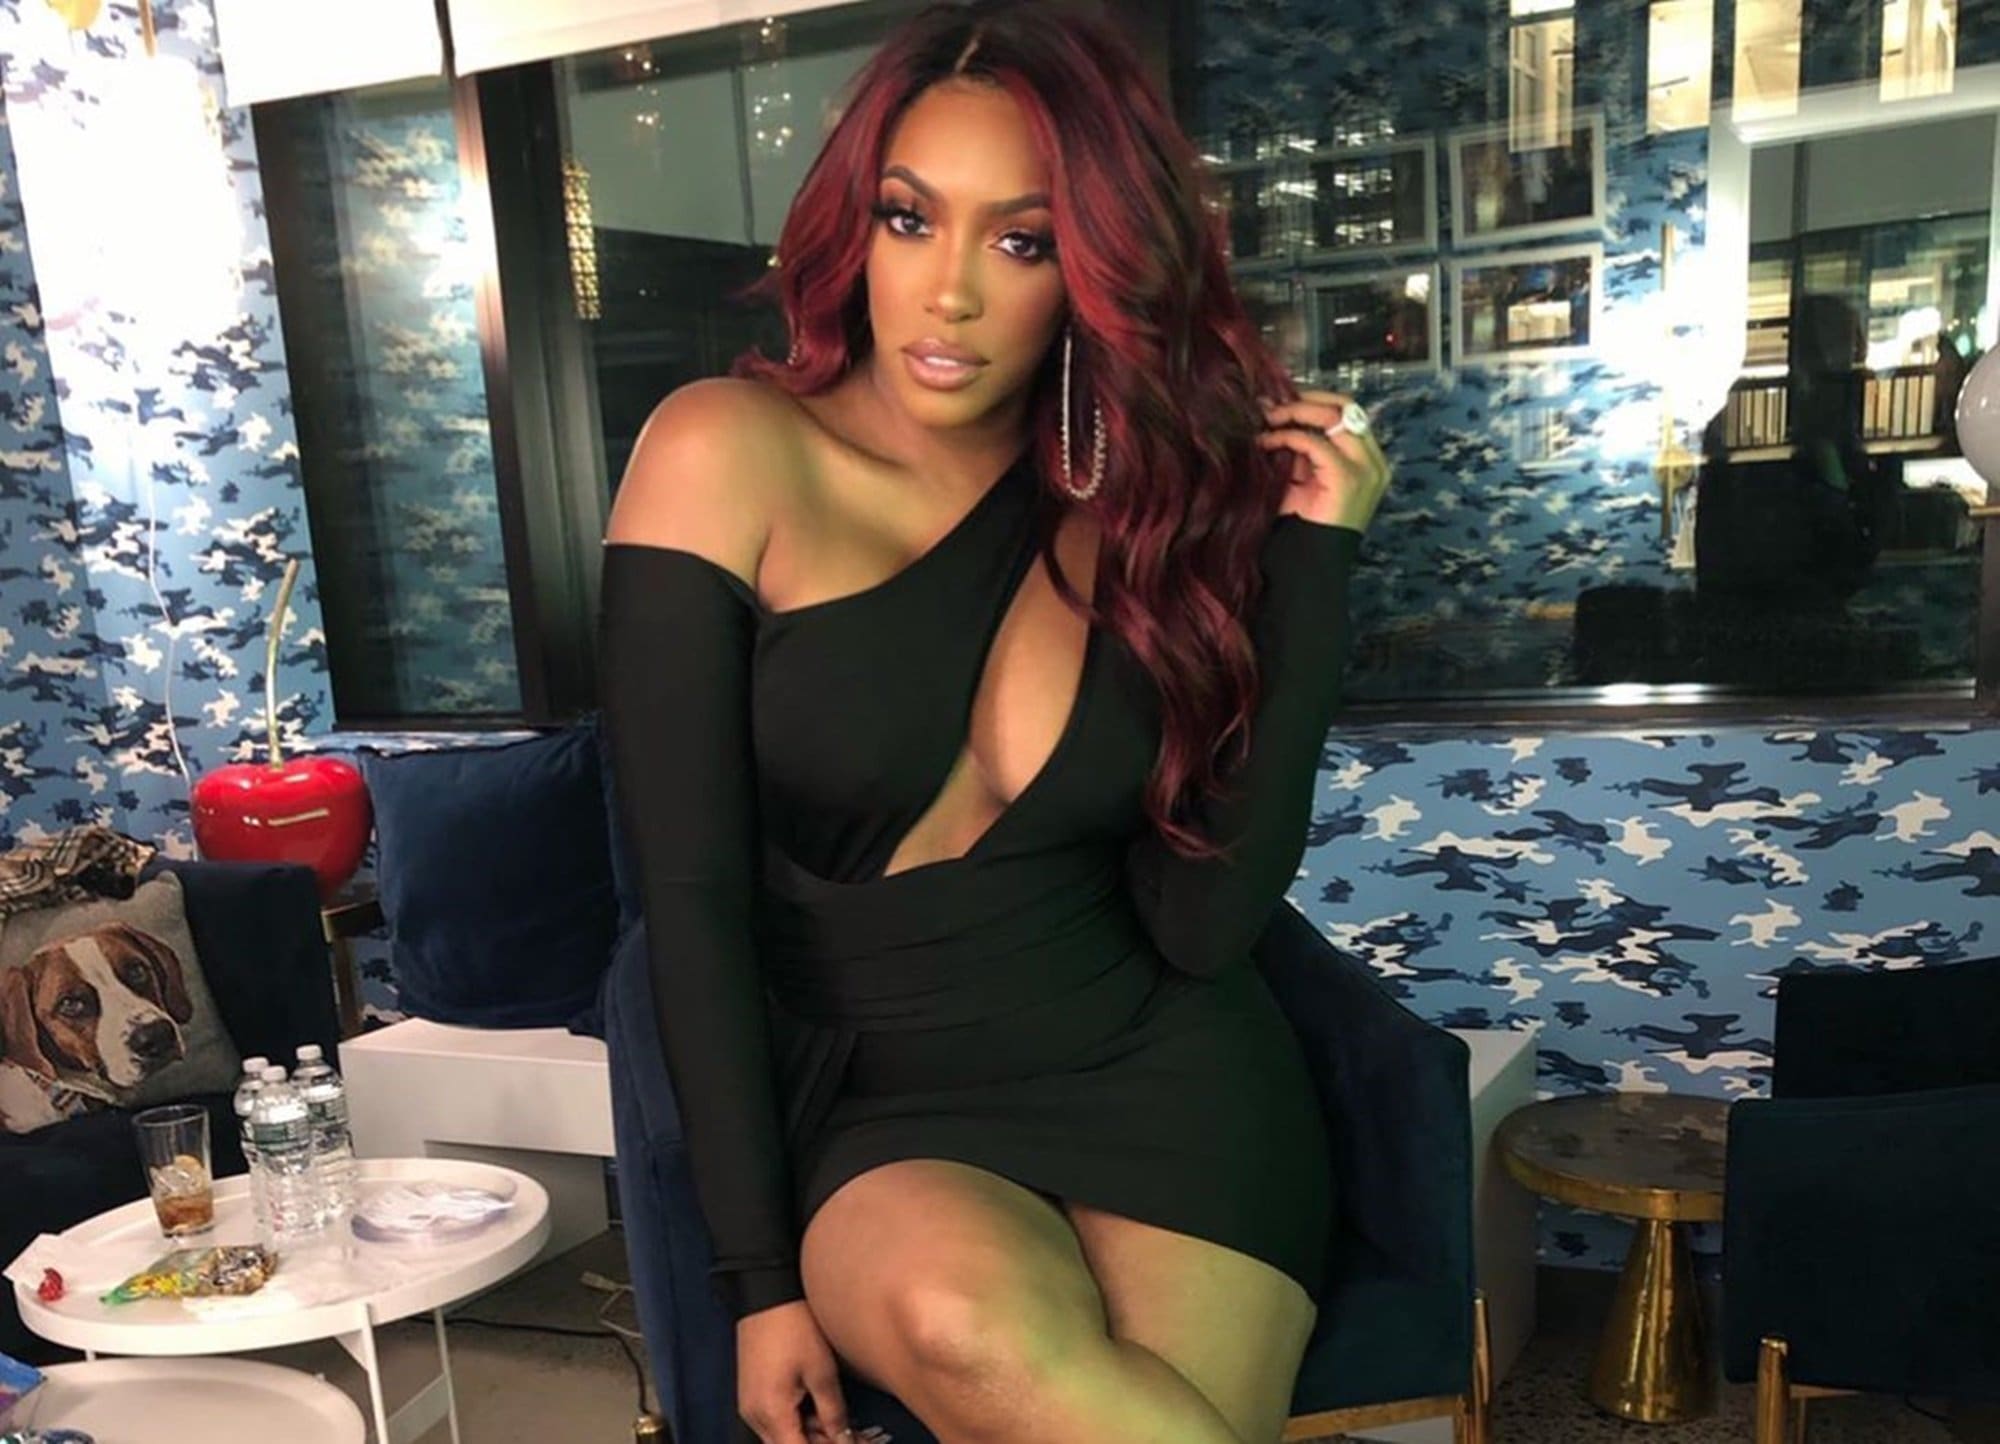 Porsha Williams' Daughter Looks Gorgeous In This Holiday Red Outfit - See The Video